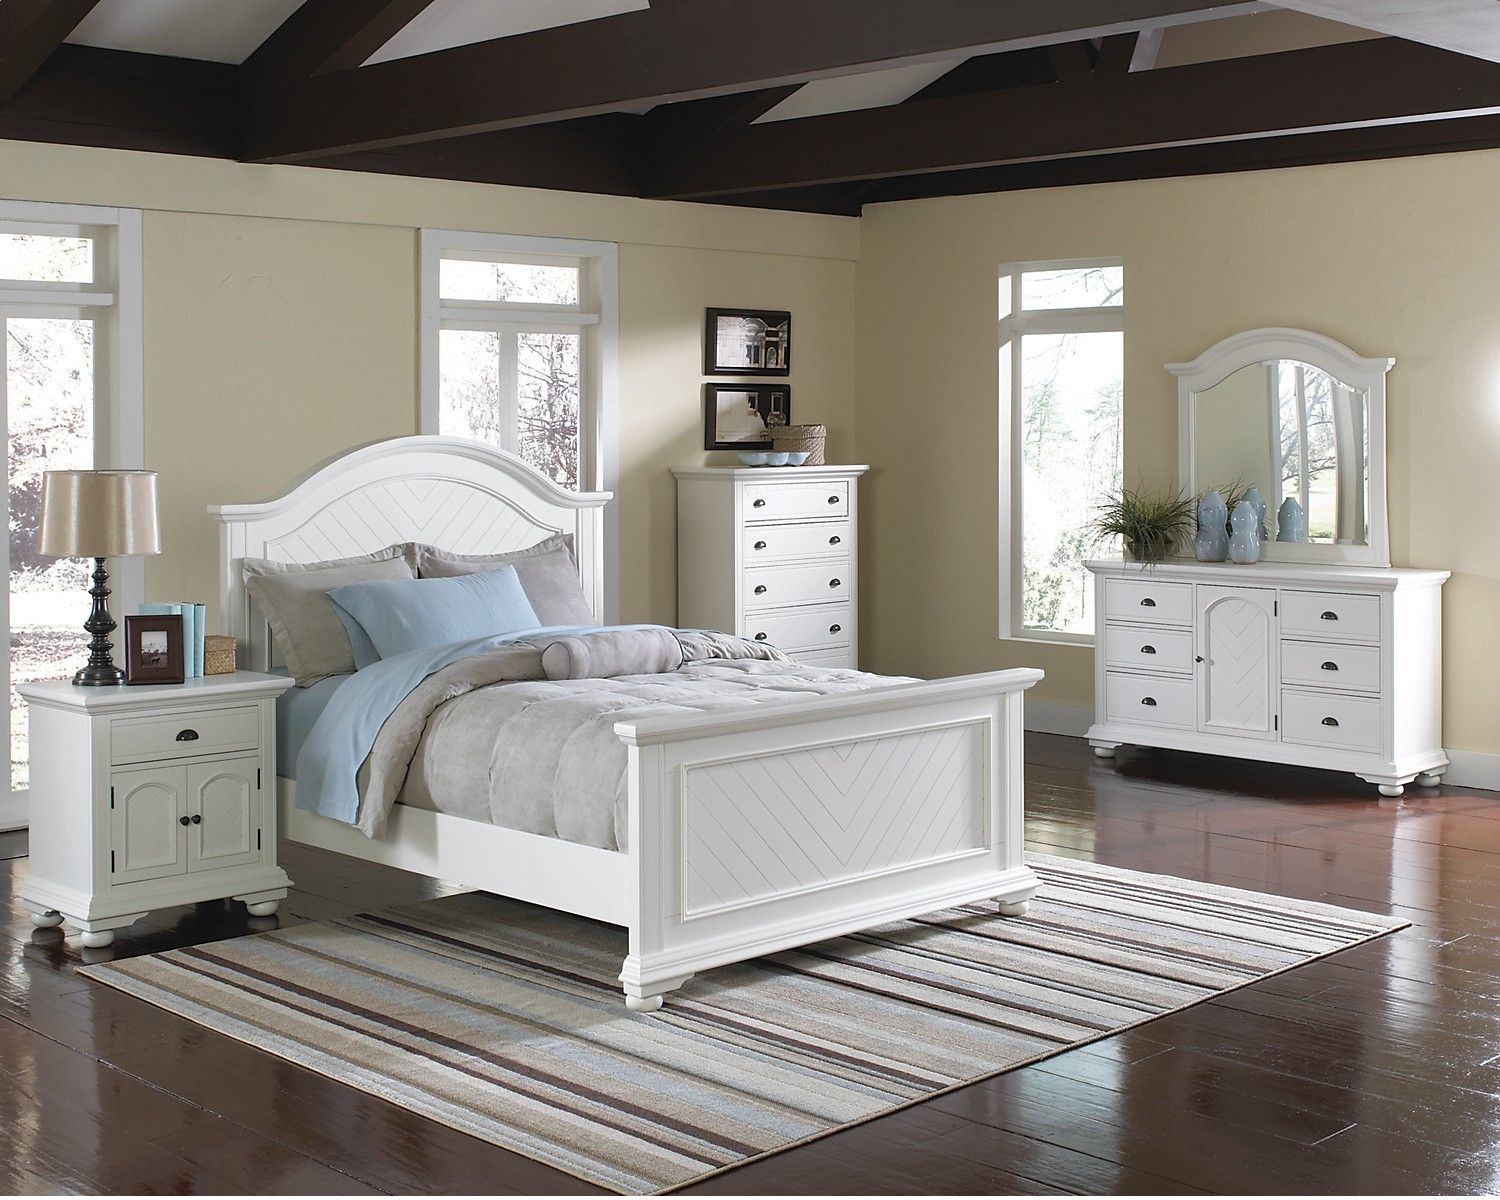 Bedroom Furniture Brook Off White 7 Piece Full Bedroom Set Stuff pertaining to measurements 1500 X 1200